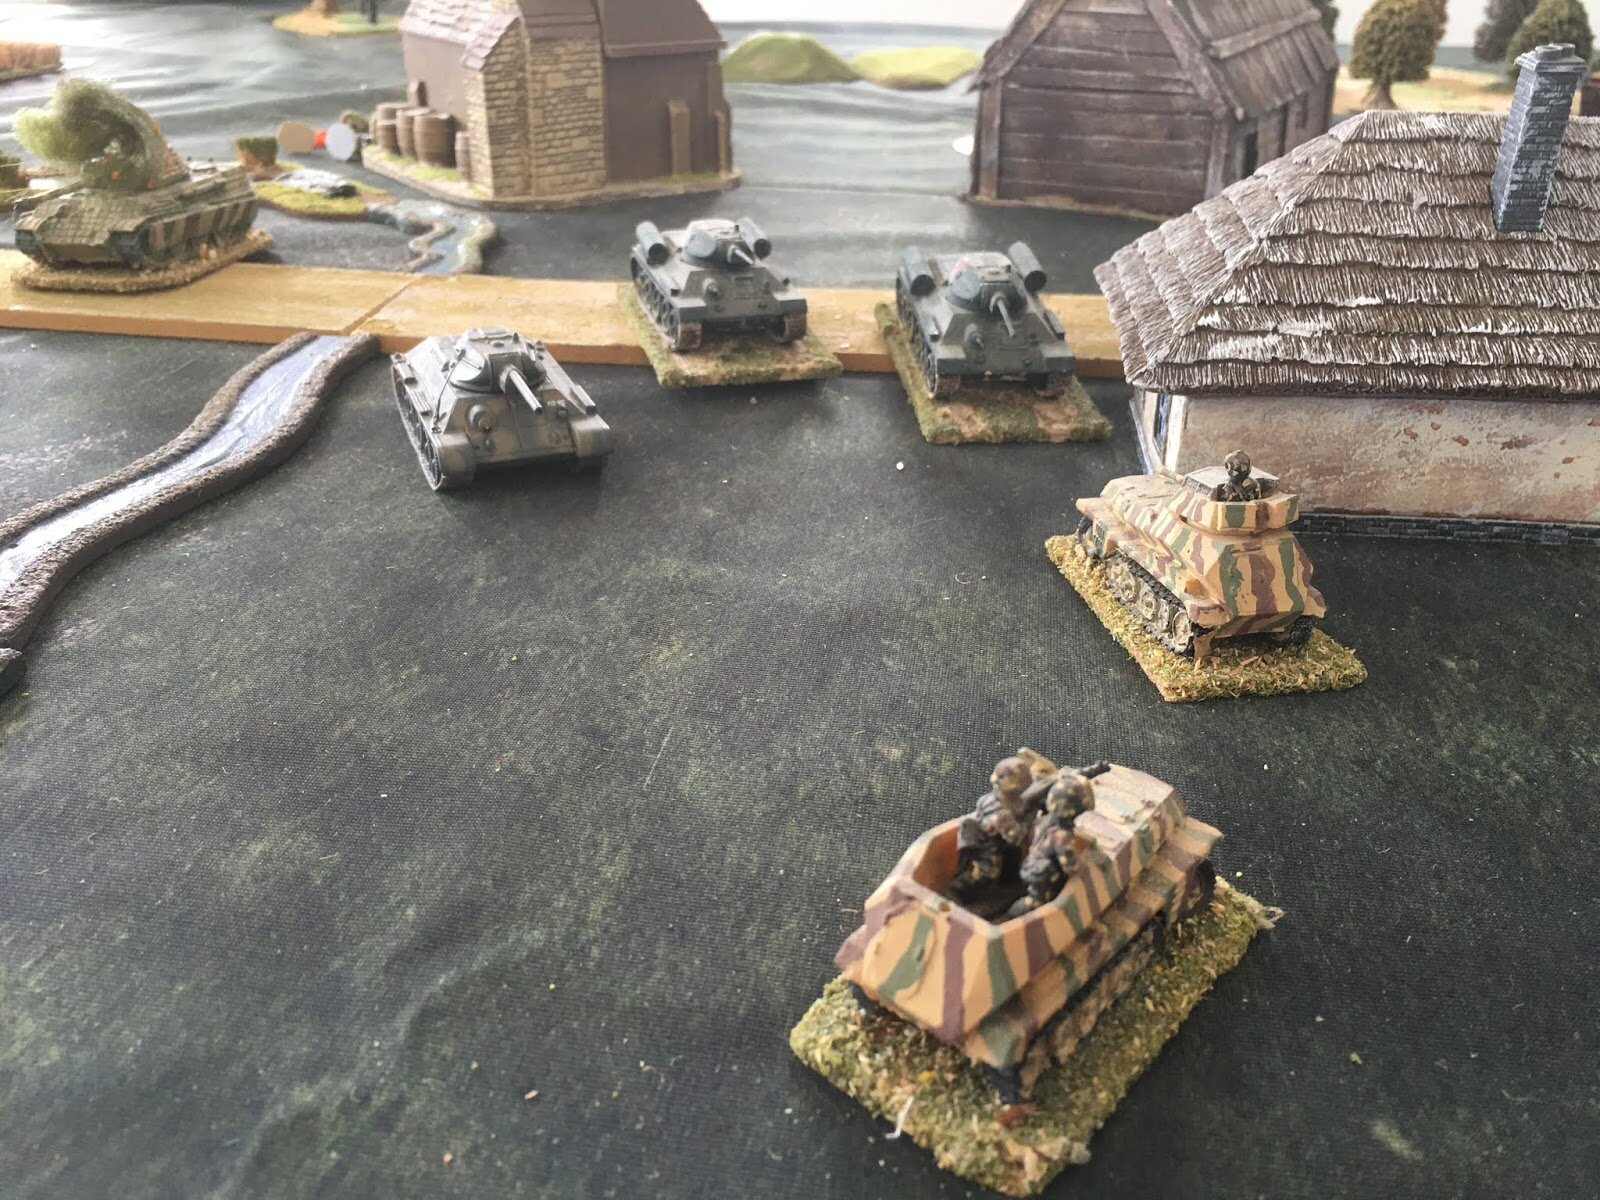 ...but the T-34s are picking off the Panzers and then turn on the smaller recce vehicles